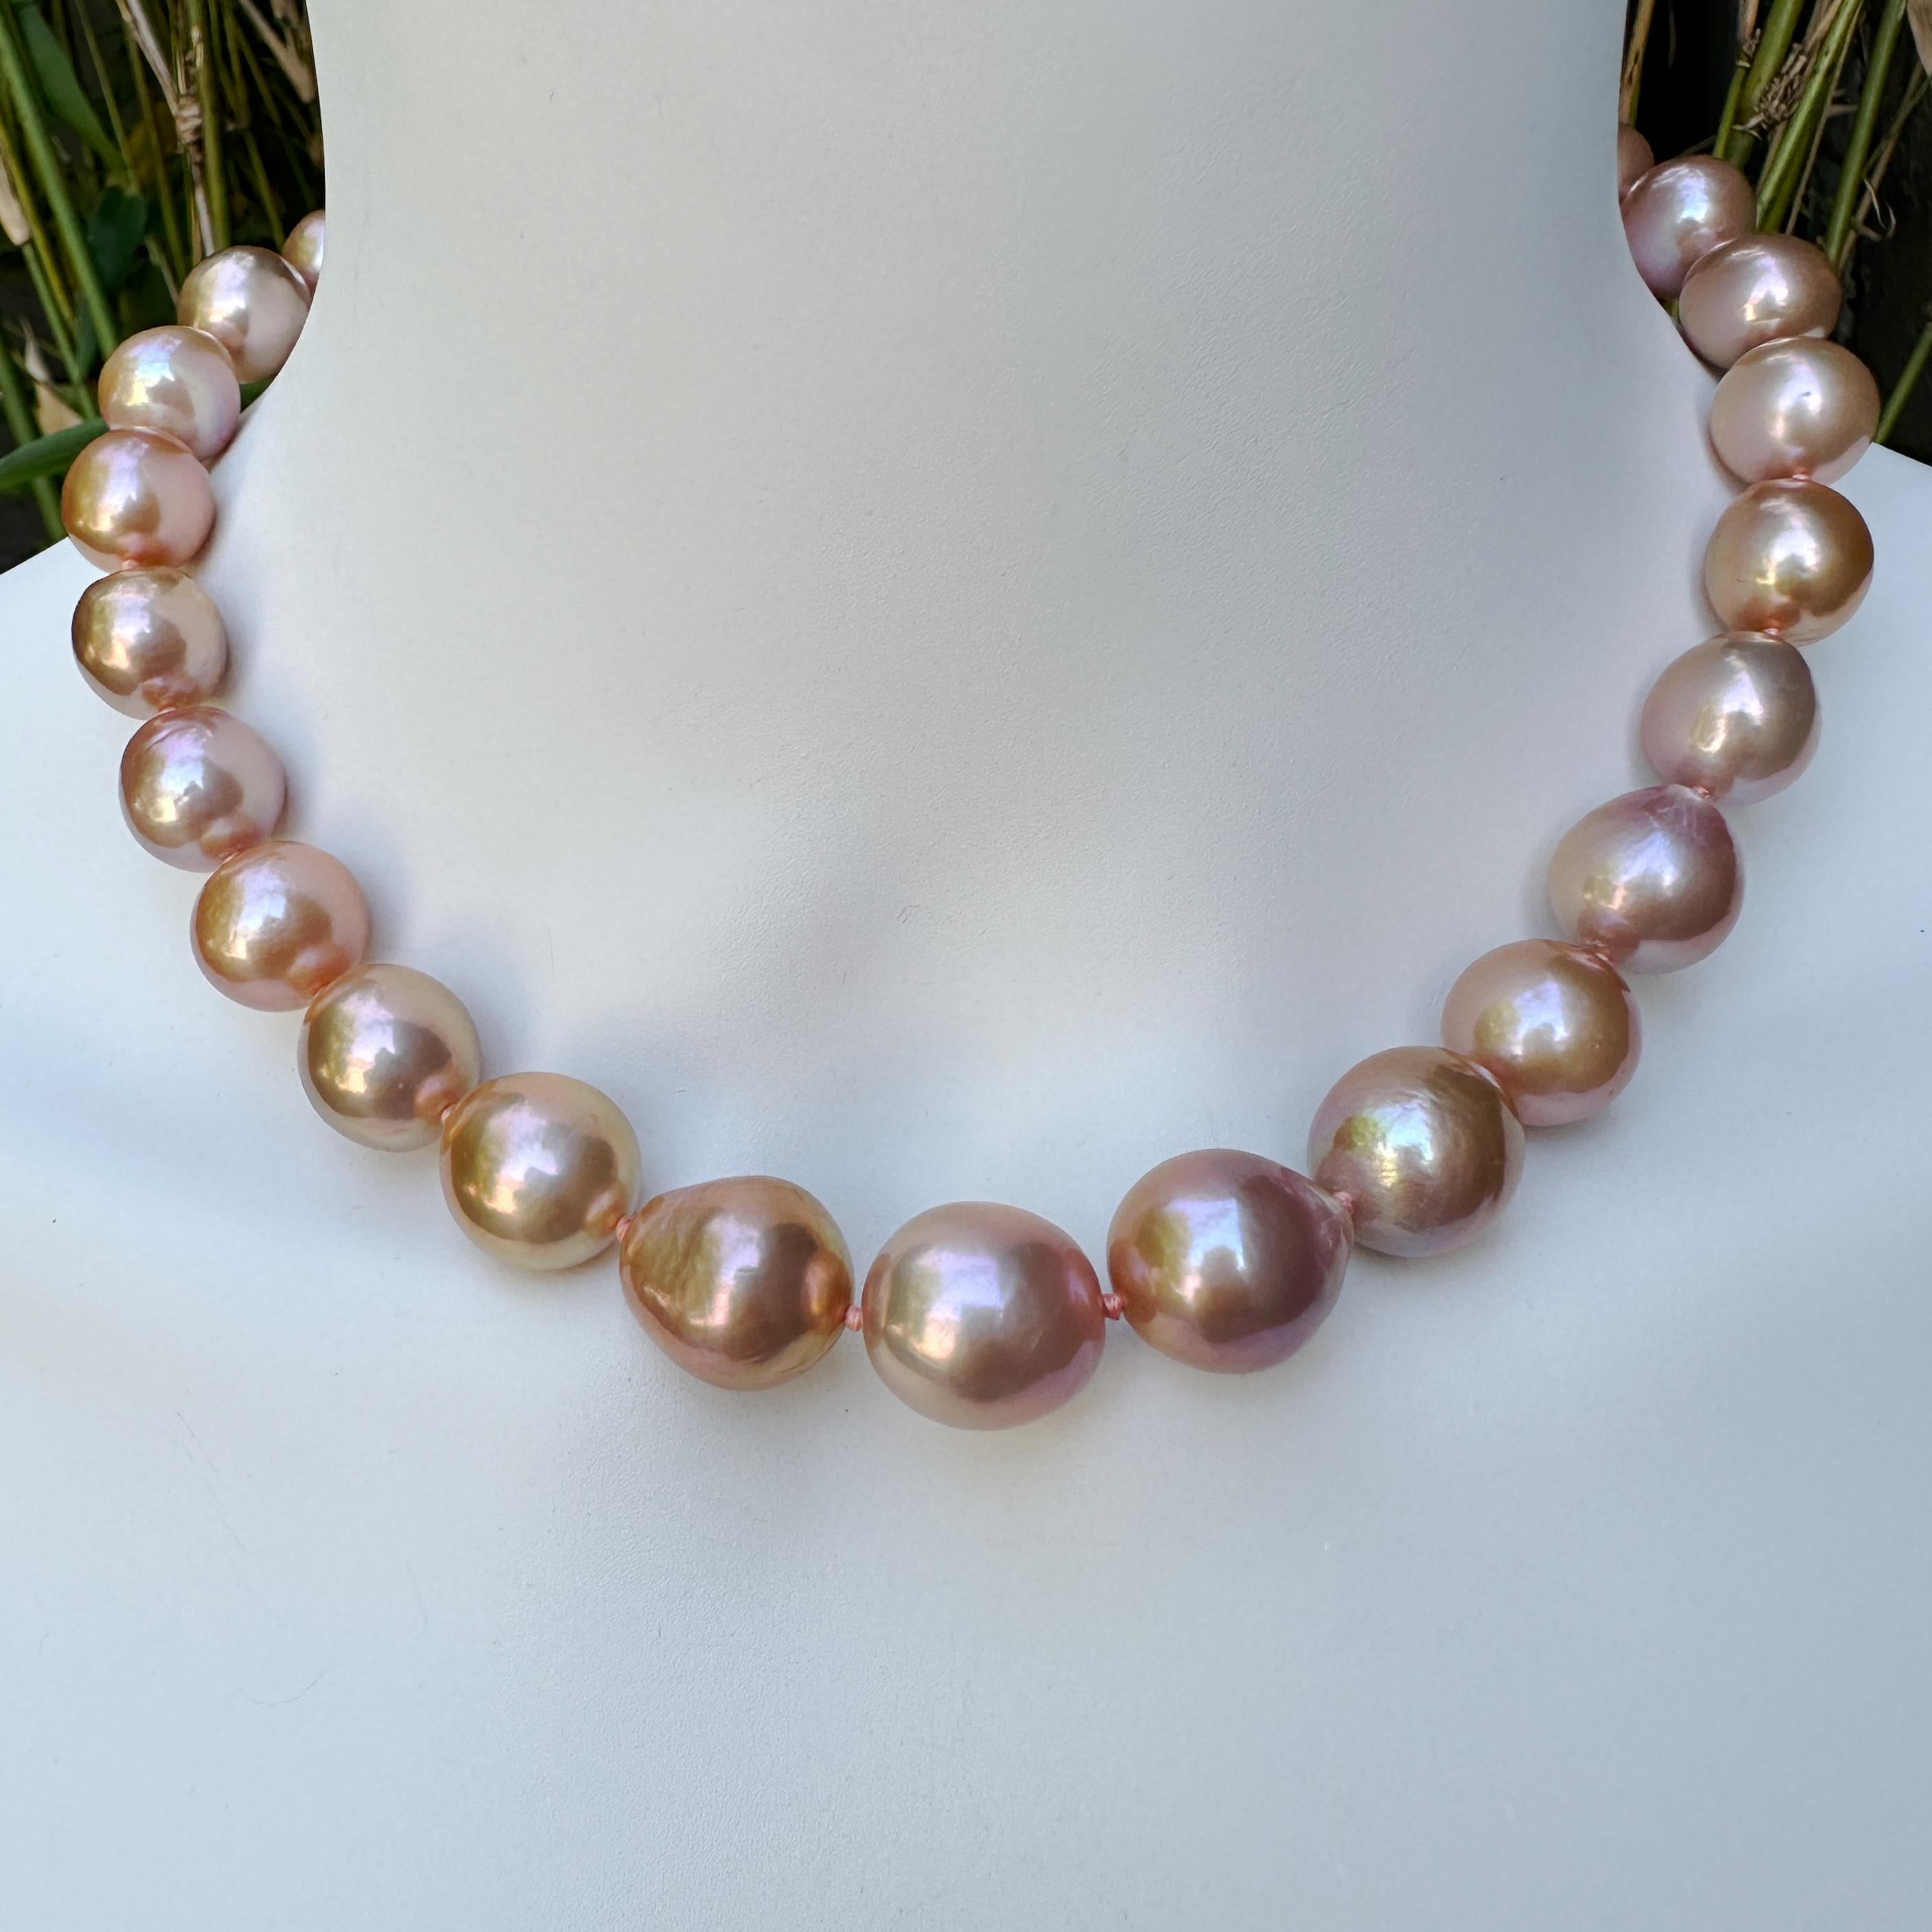 Edison pearls, a freshwater pearl variety that has only been around for a few years. are the product of several years' research by Grace Pearls, located in China.    Borrowing from the techniques used to cultivate saltwater pearls, and adding some